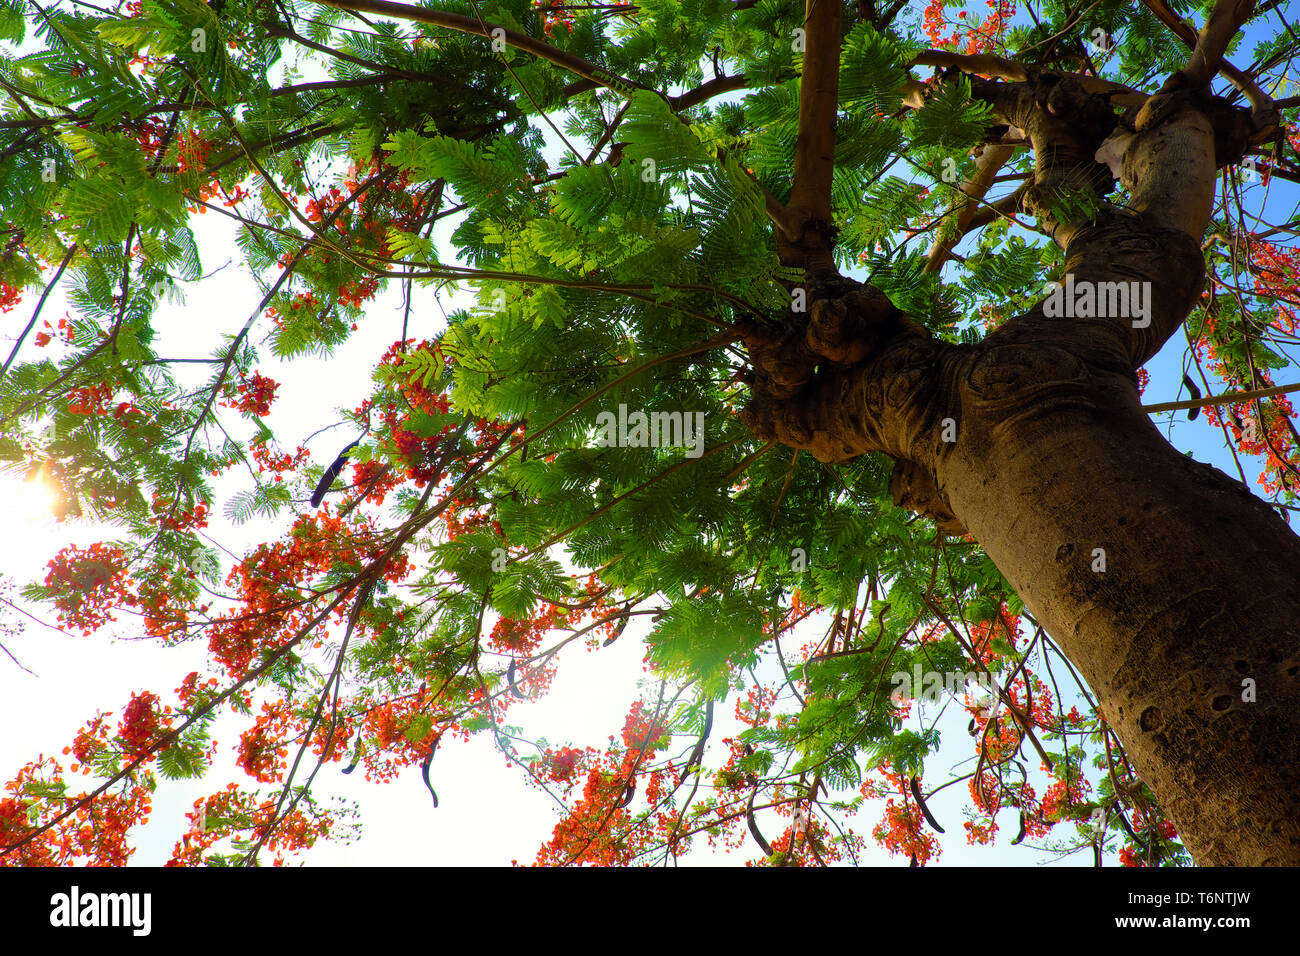 Flamboyant tree or phoenix flower,  urban tree that bloom bright red flowers in summer season, beautiful blossom on branch of tree from bottom view Stock Photo